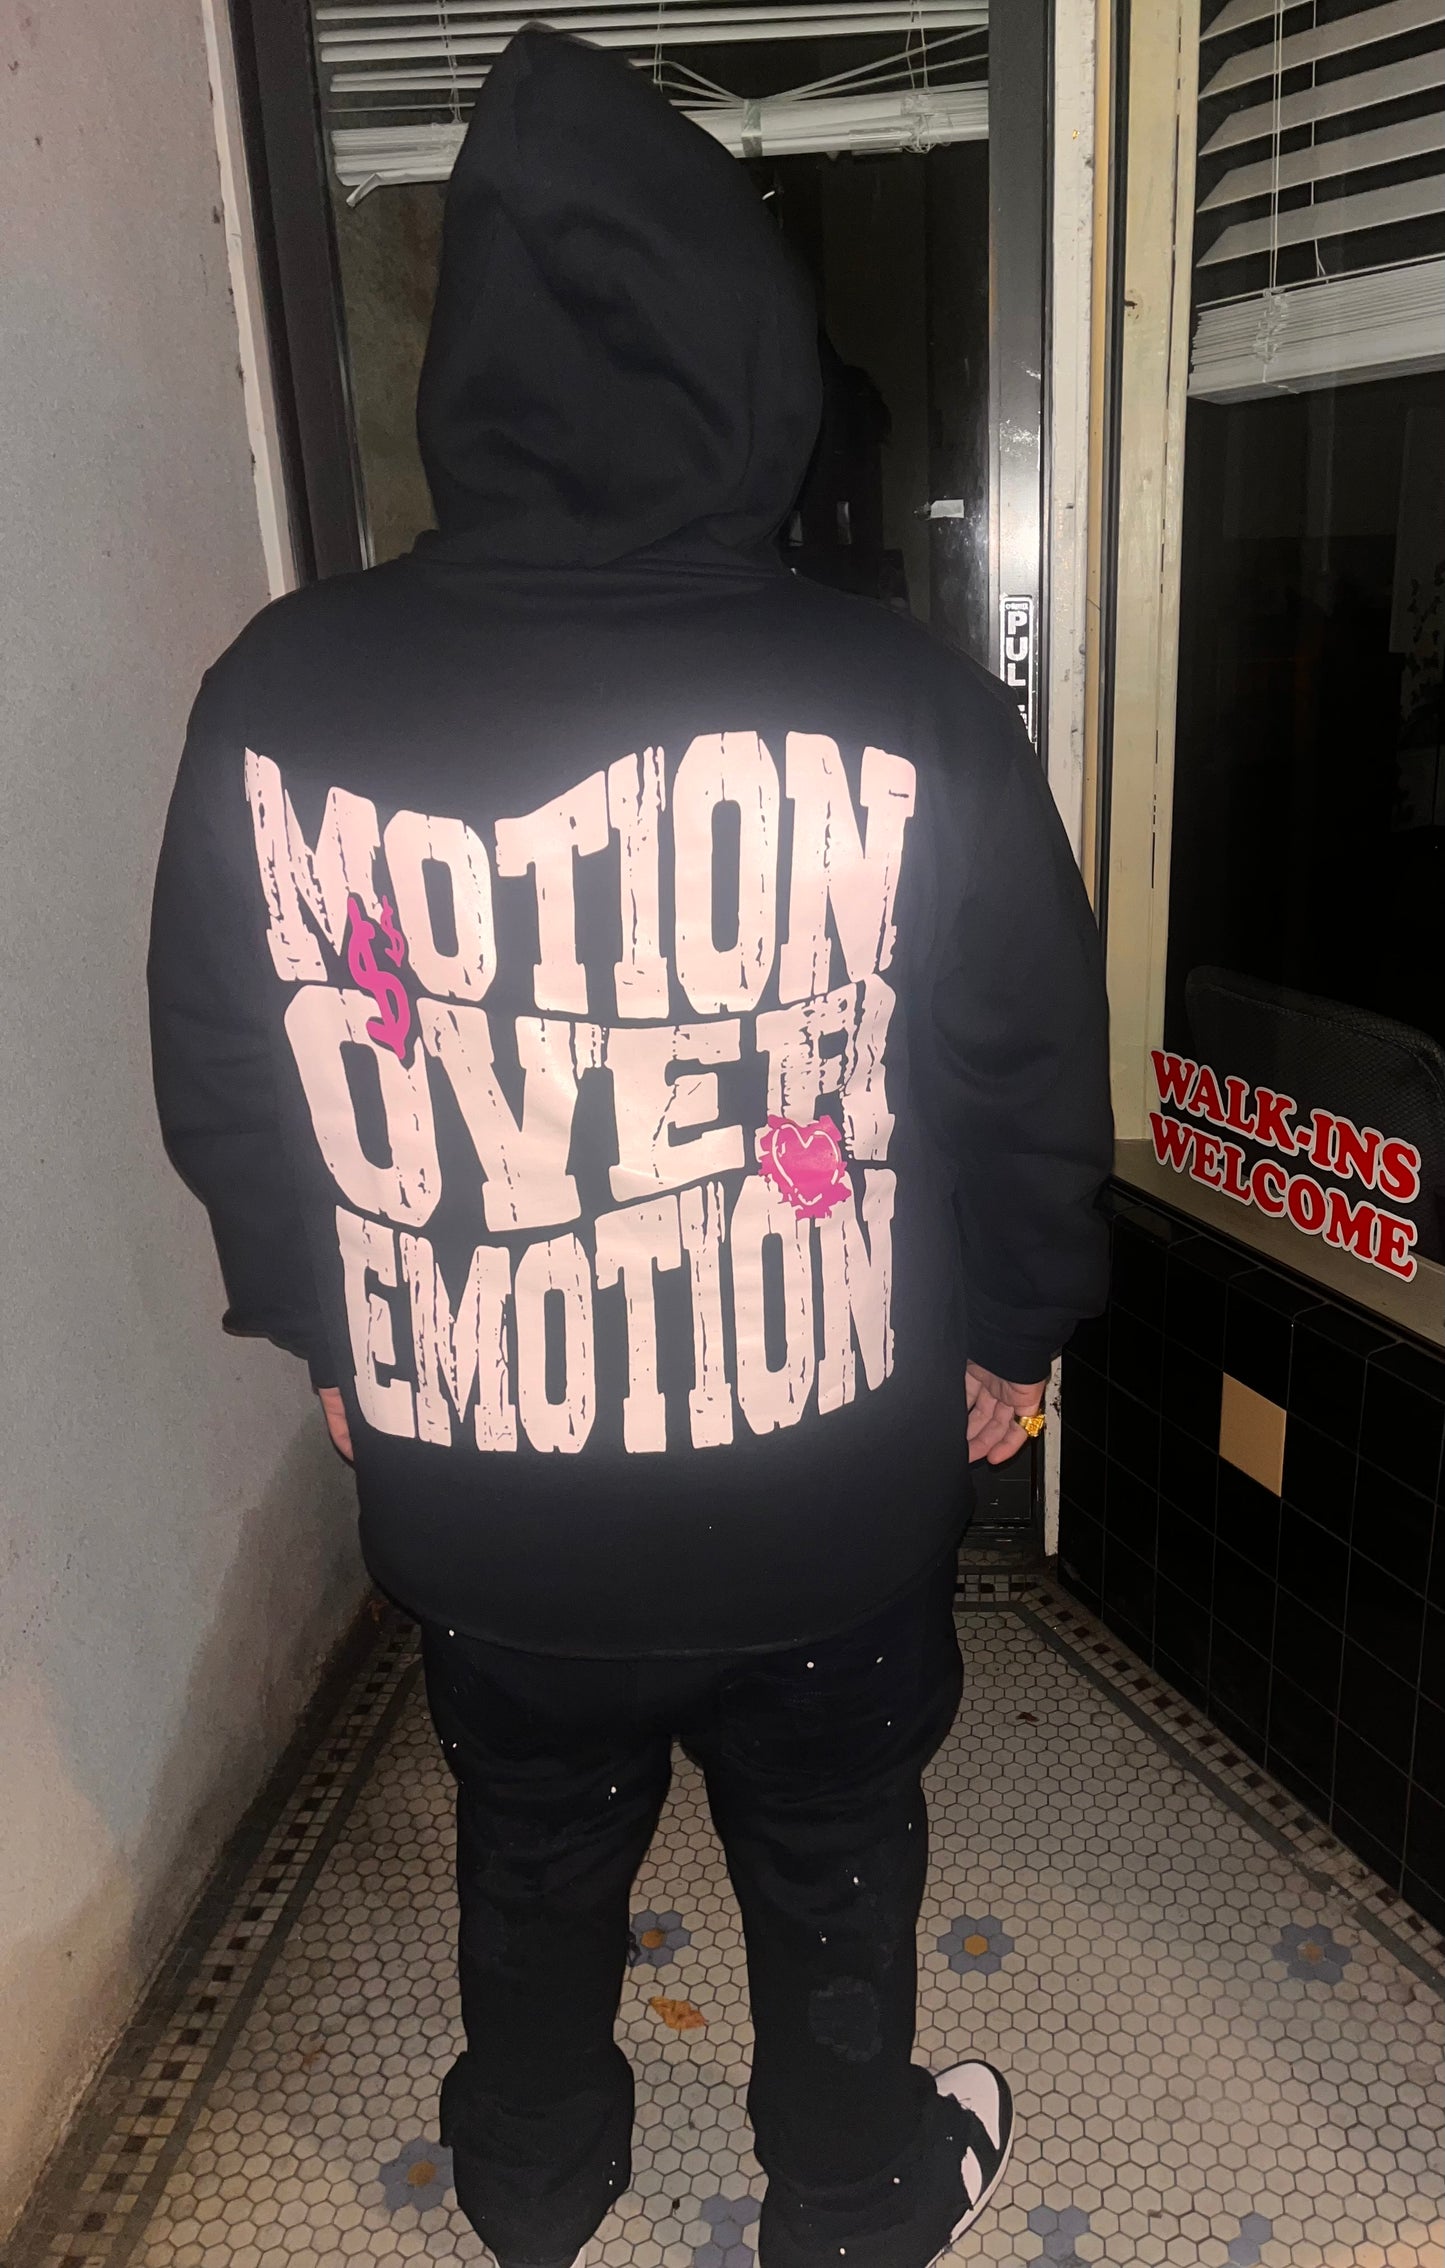 “Motion Over Emotion” Hoodies